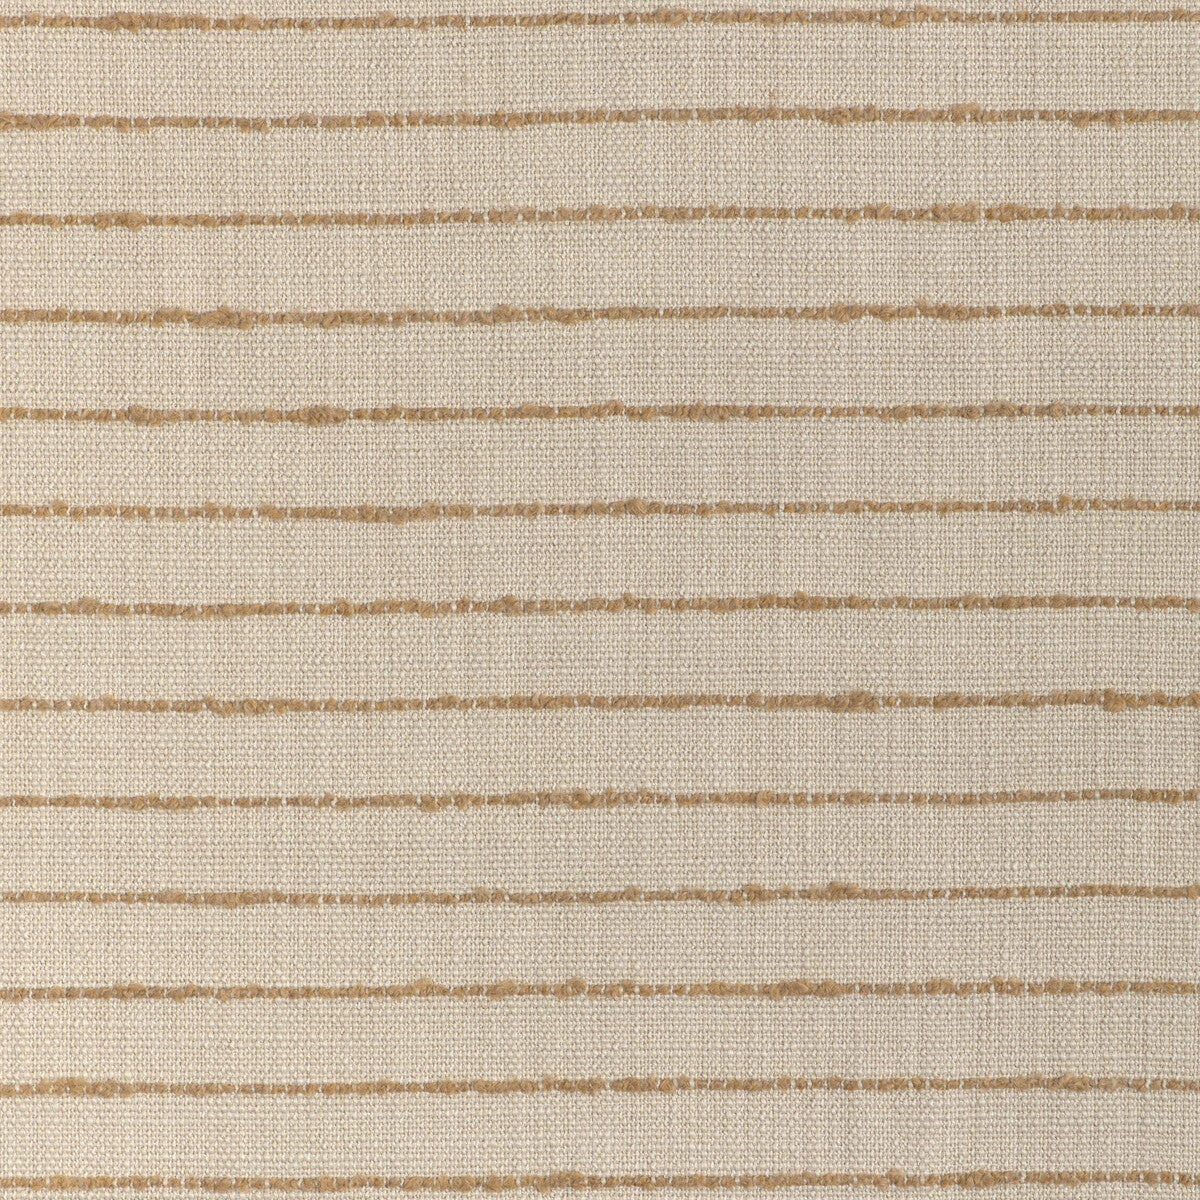 Les Vignes Stripe fabric in sand color - pattern 8024116.416.0 - by Brunschwig &amp; Fils in the Les Ensembliers L&